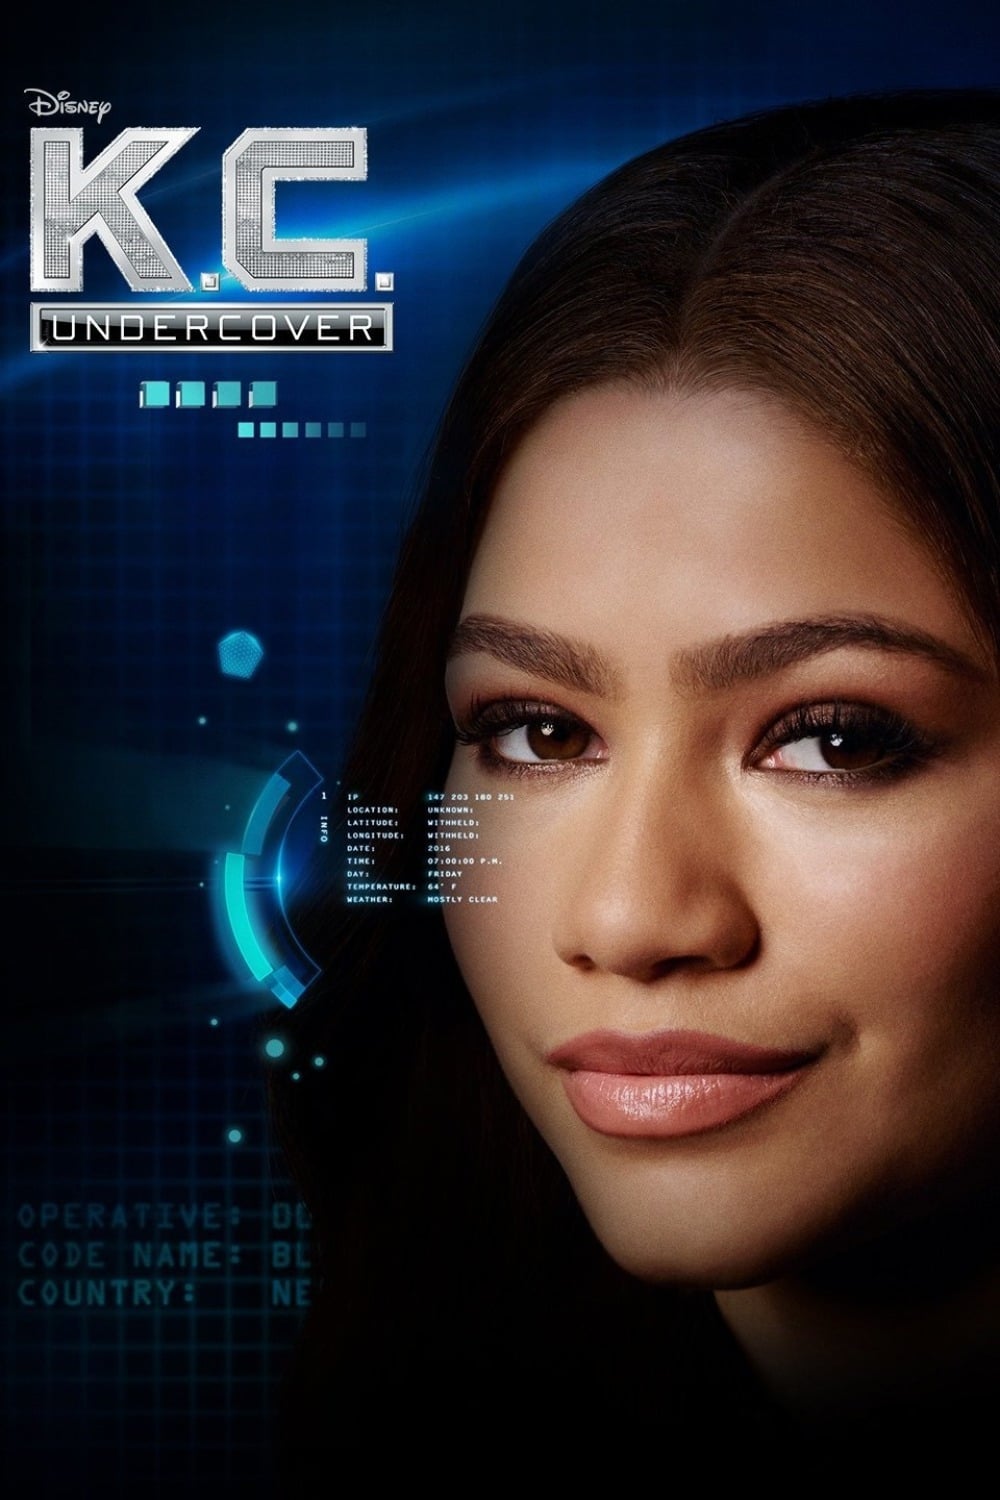 K.C. Undercover TV Shows About Artificial Intelligence